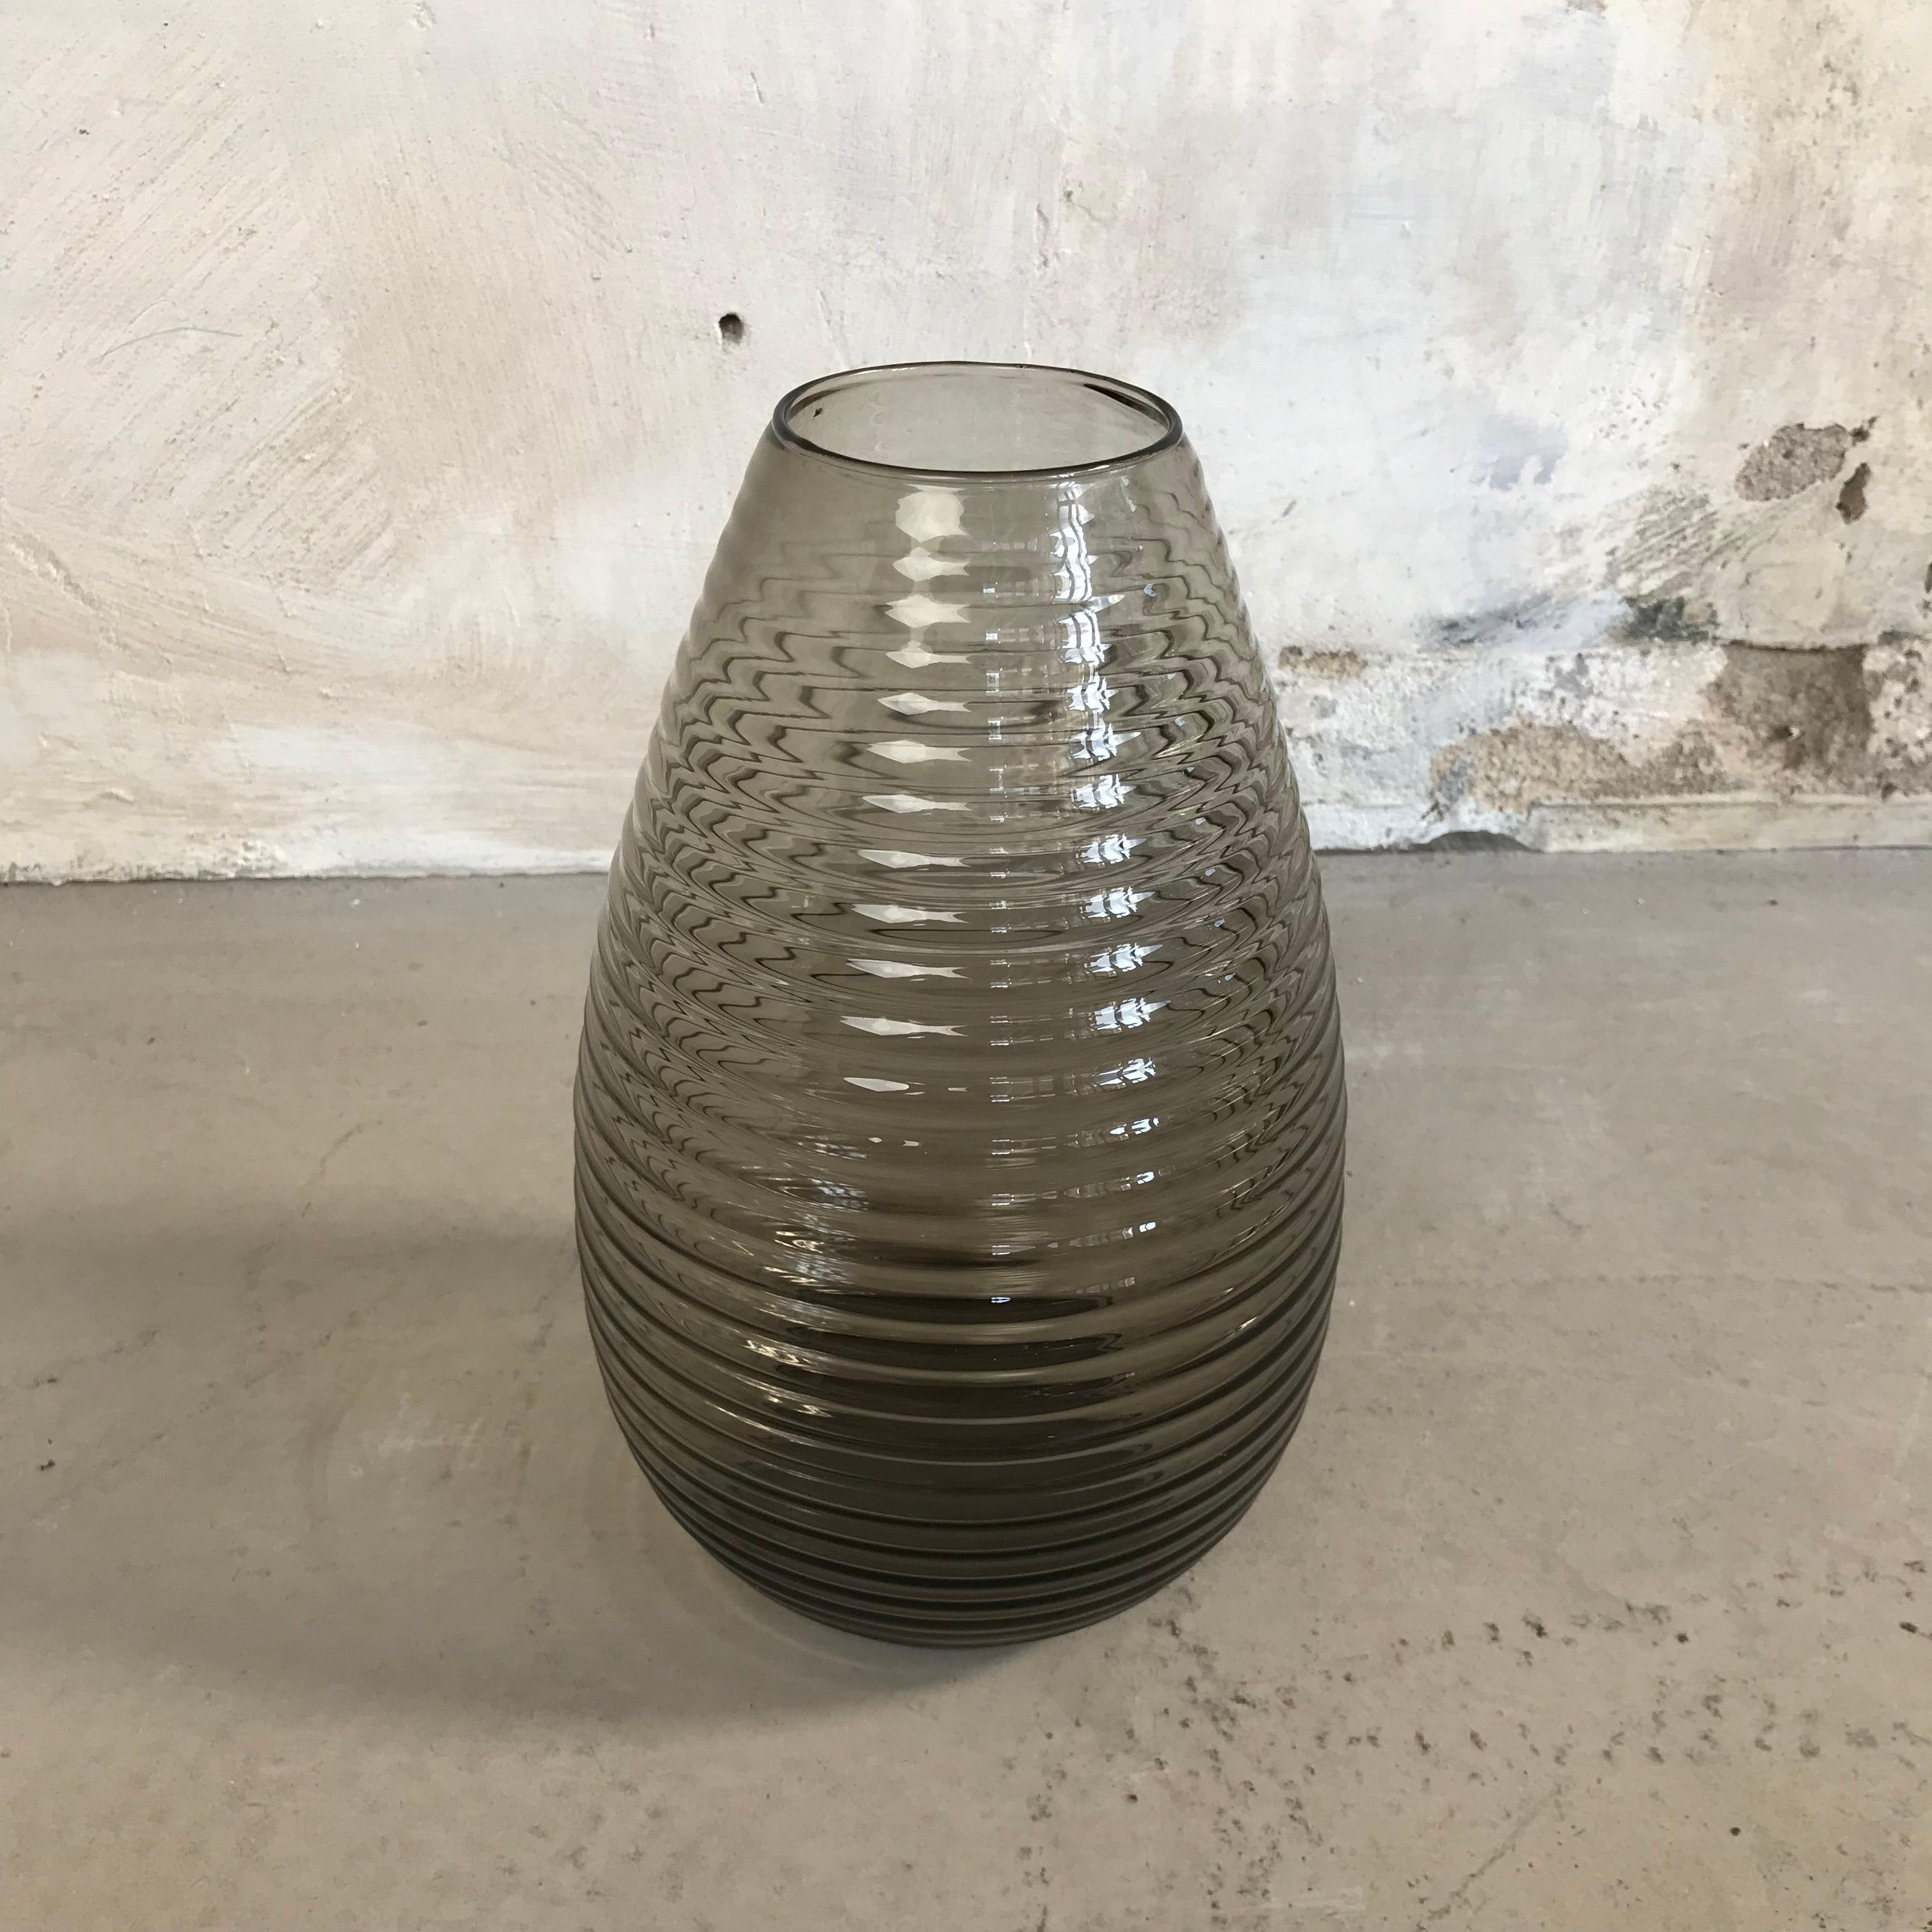 Beautiful fumi colored large vase design A.D. Copier made by Leerdam Glassworks, the Netherlands, 1956- 1960.
Very rare in this large size!
A stylish teardrop shape with horizontal ribbs. The vase was a great success after the war, nowadays it is